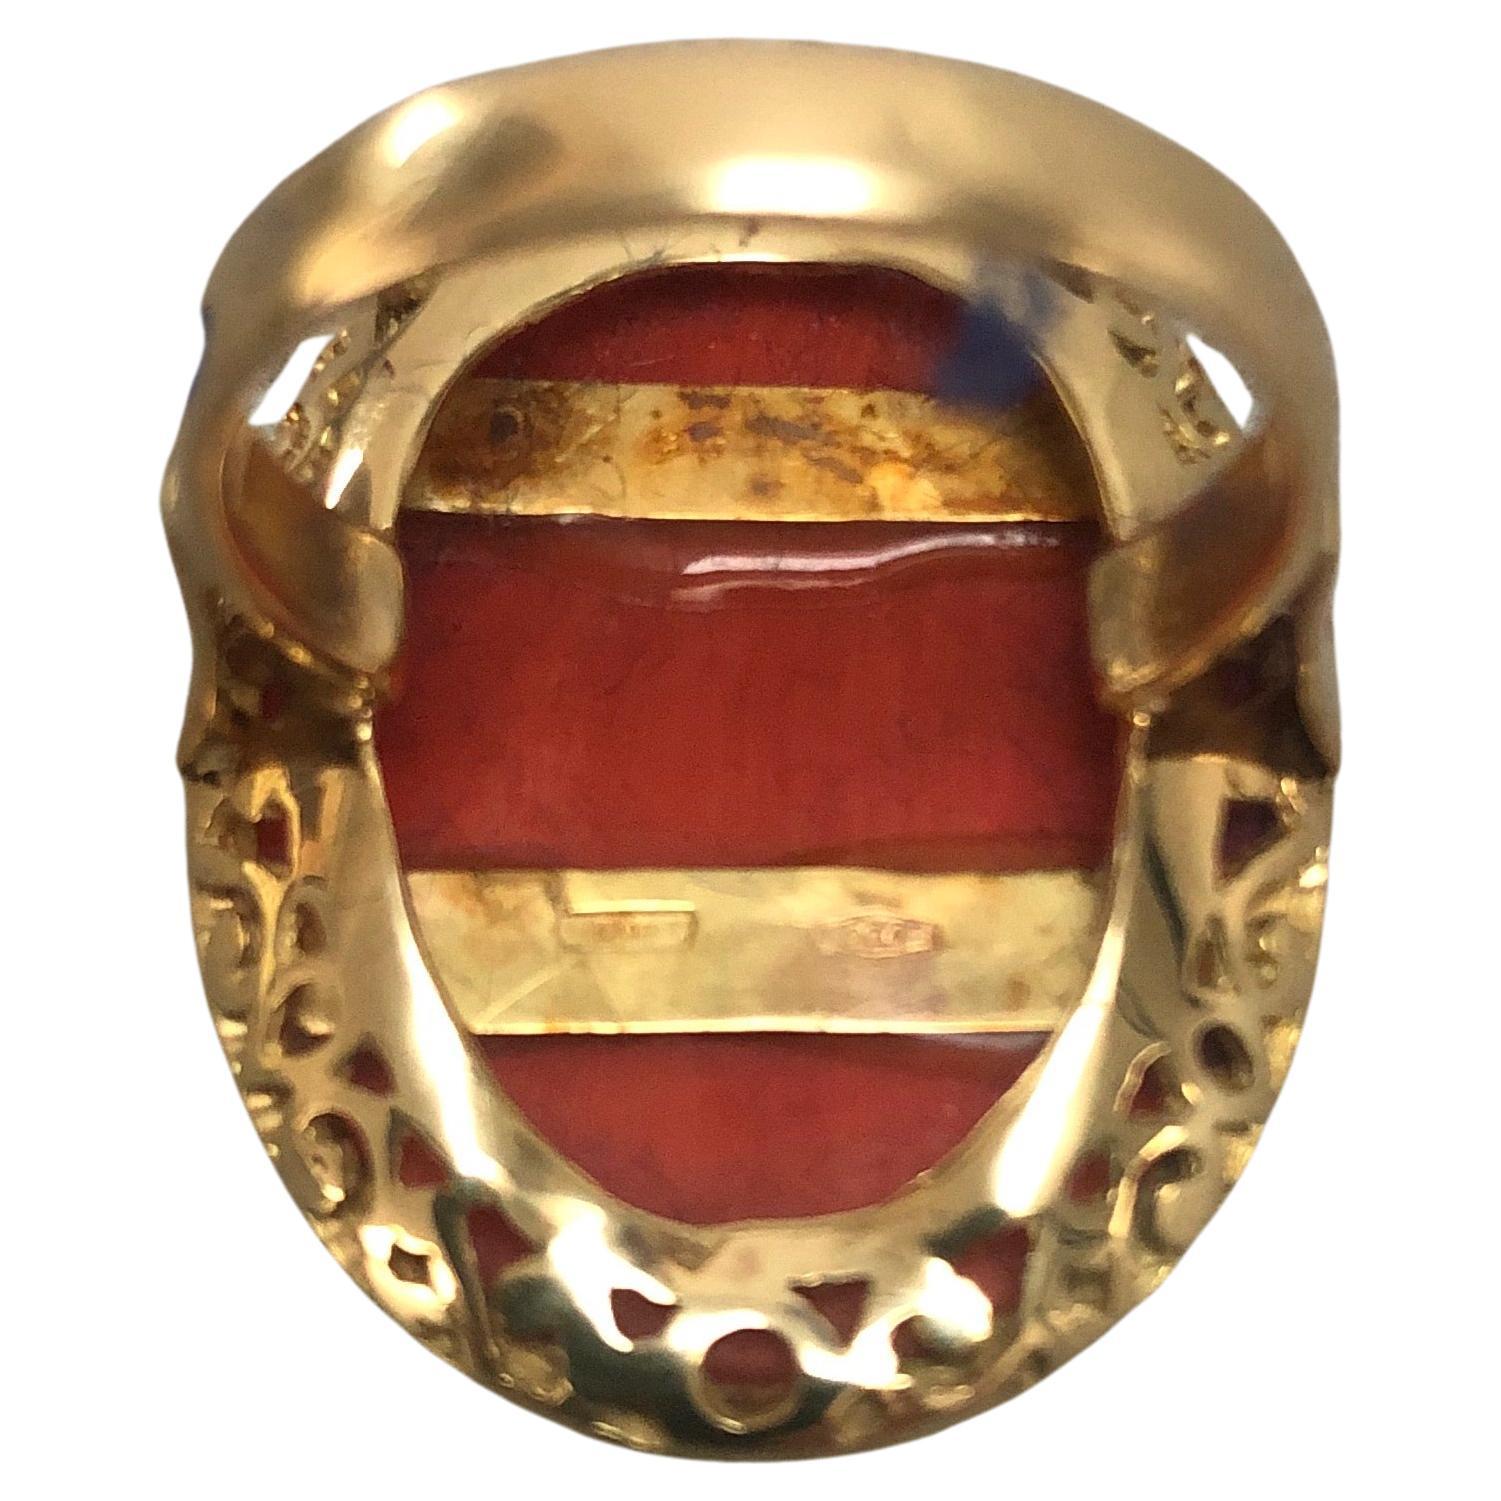 Stunning large natural oval coral set in 18 karat gold, one of kind ring. Ring size about 6.75 coral 1.18 inch by 0.78, total weight 9.78 grams.